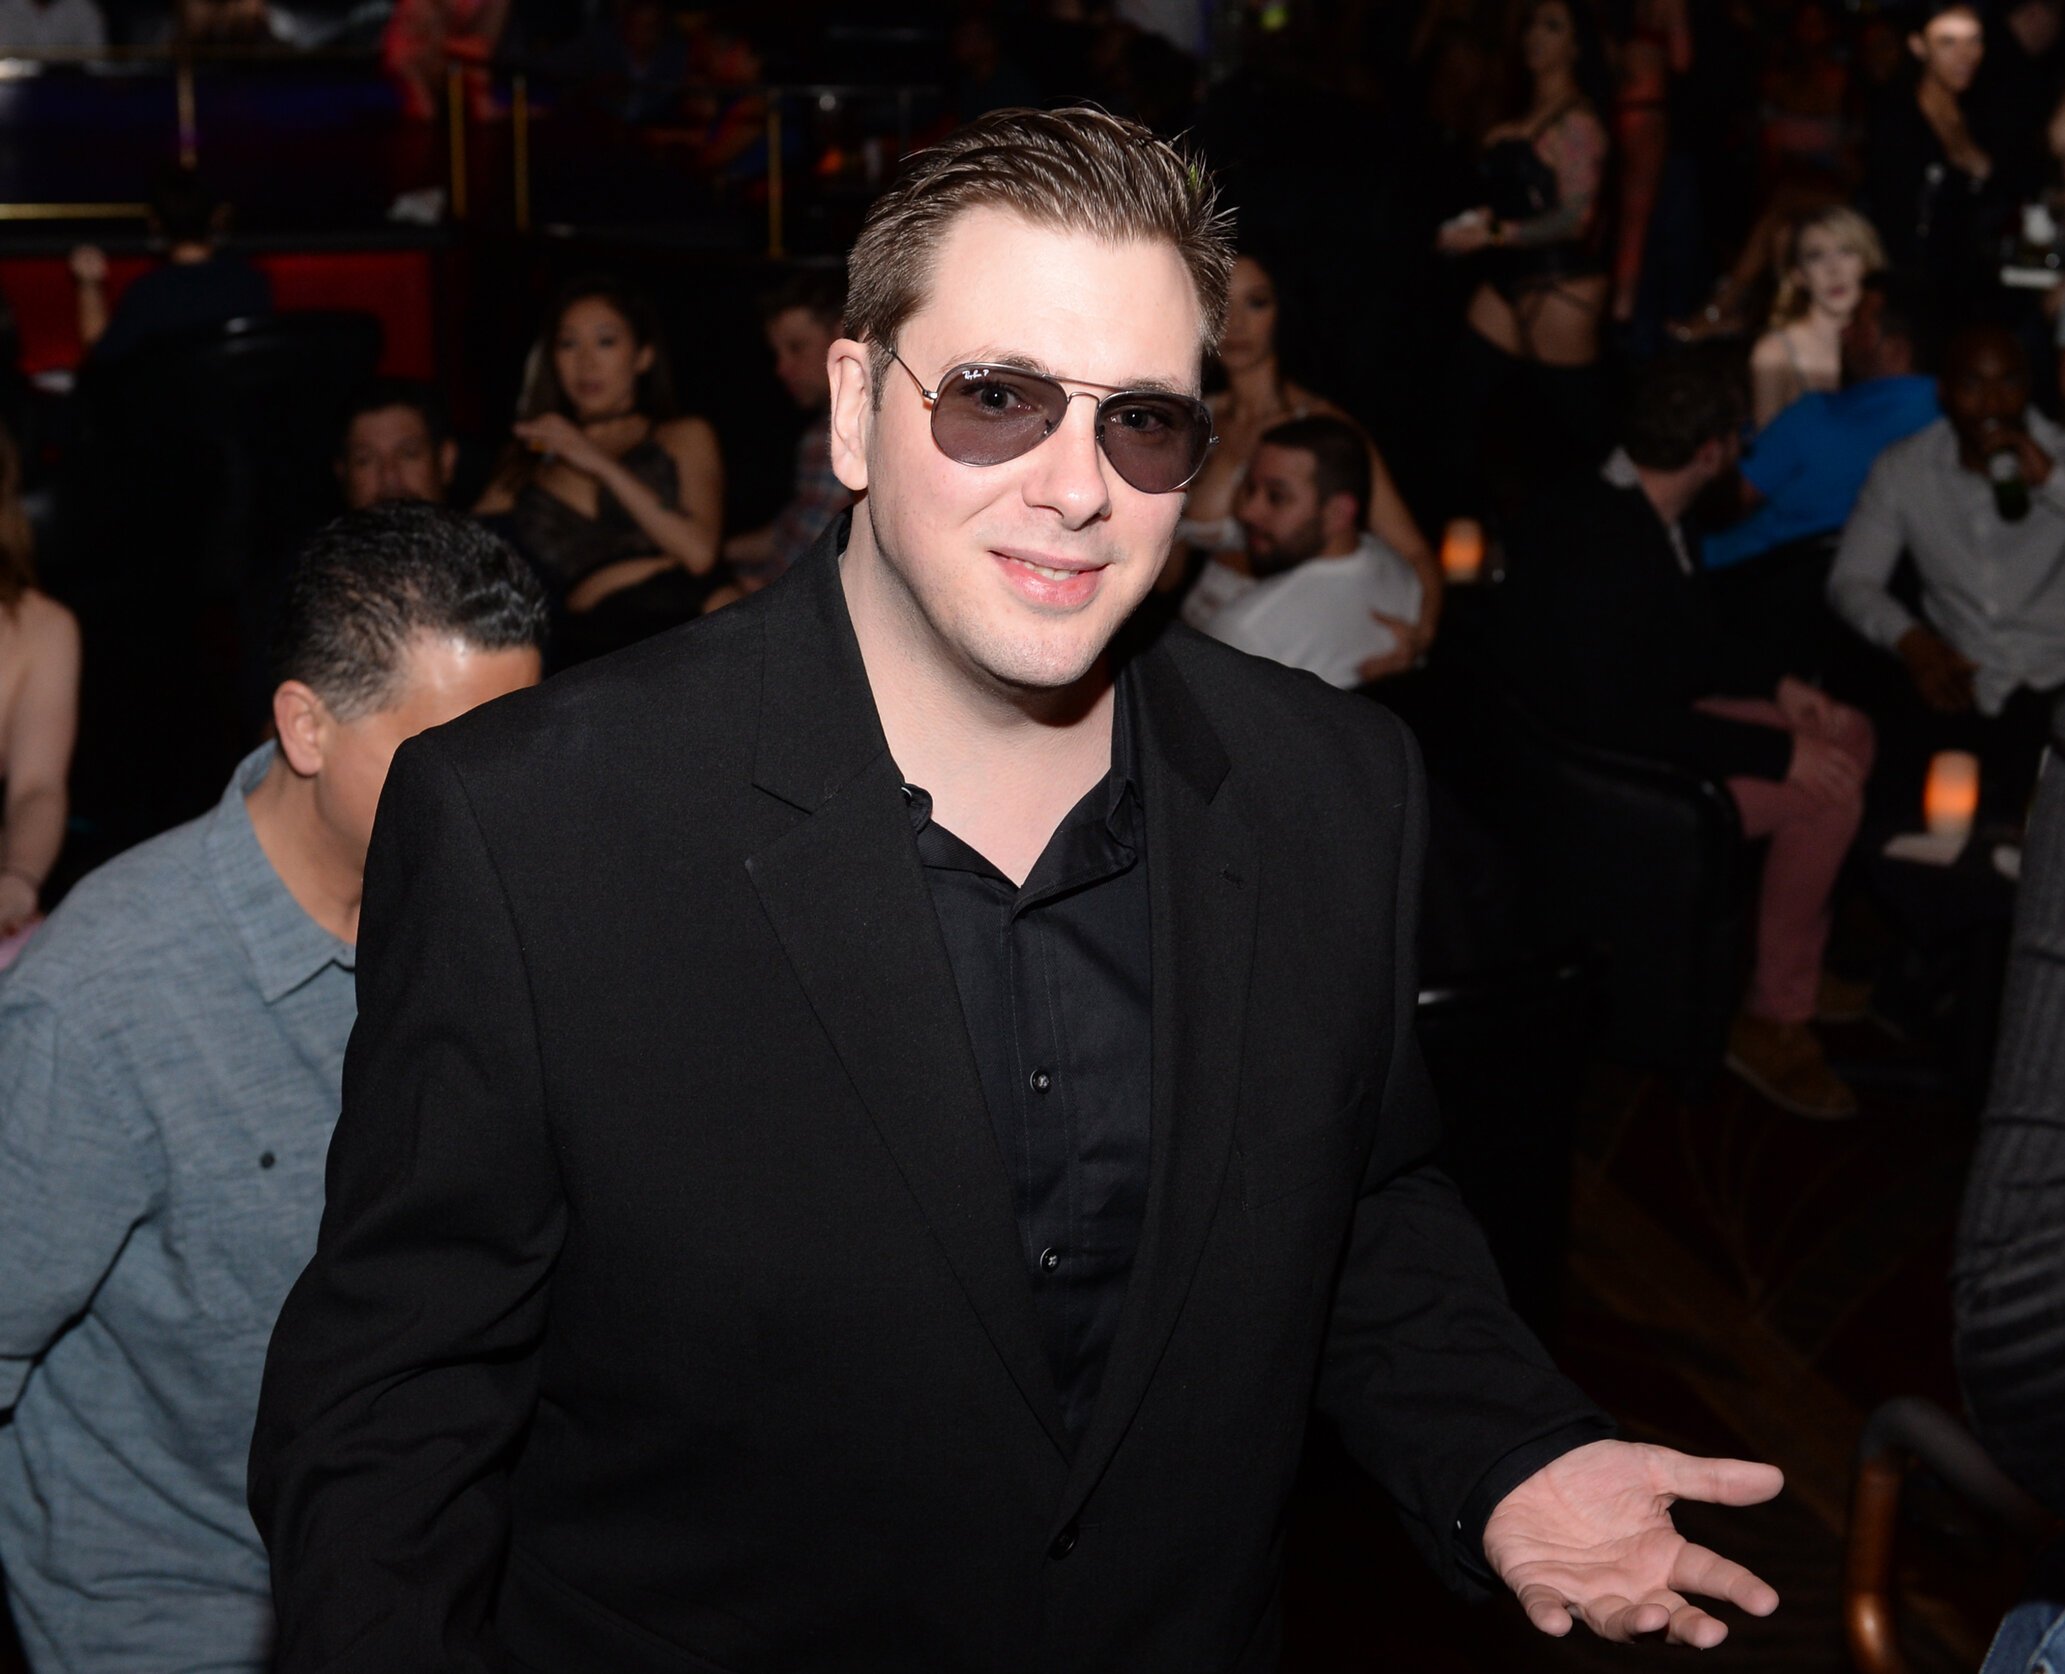 Colt Johnson at his divorce party in Las Vegas, Nevada